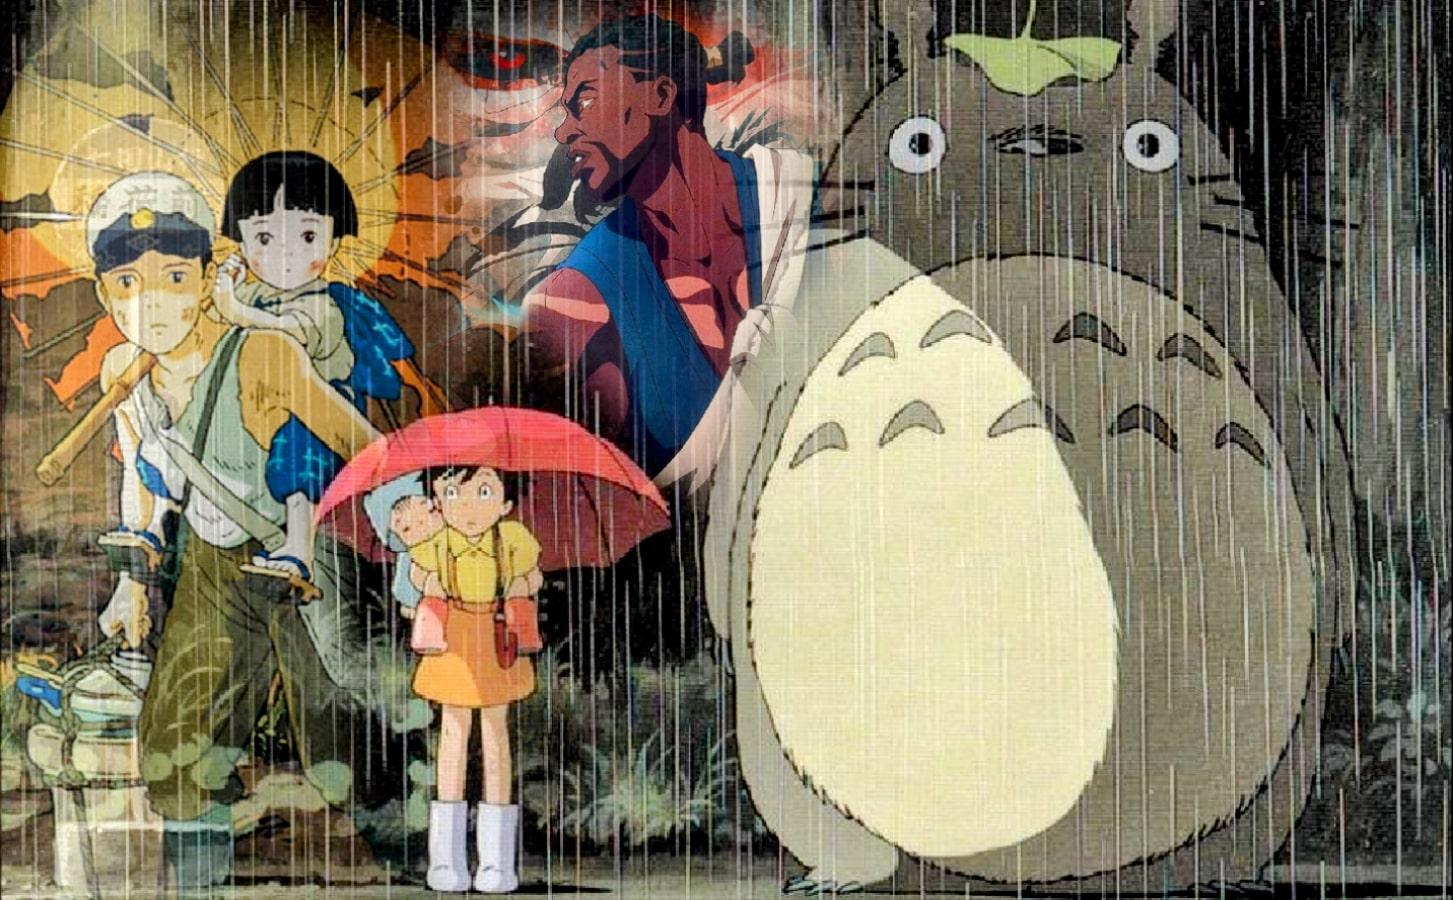 9 Anime Inspired by Real-Life Stories